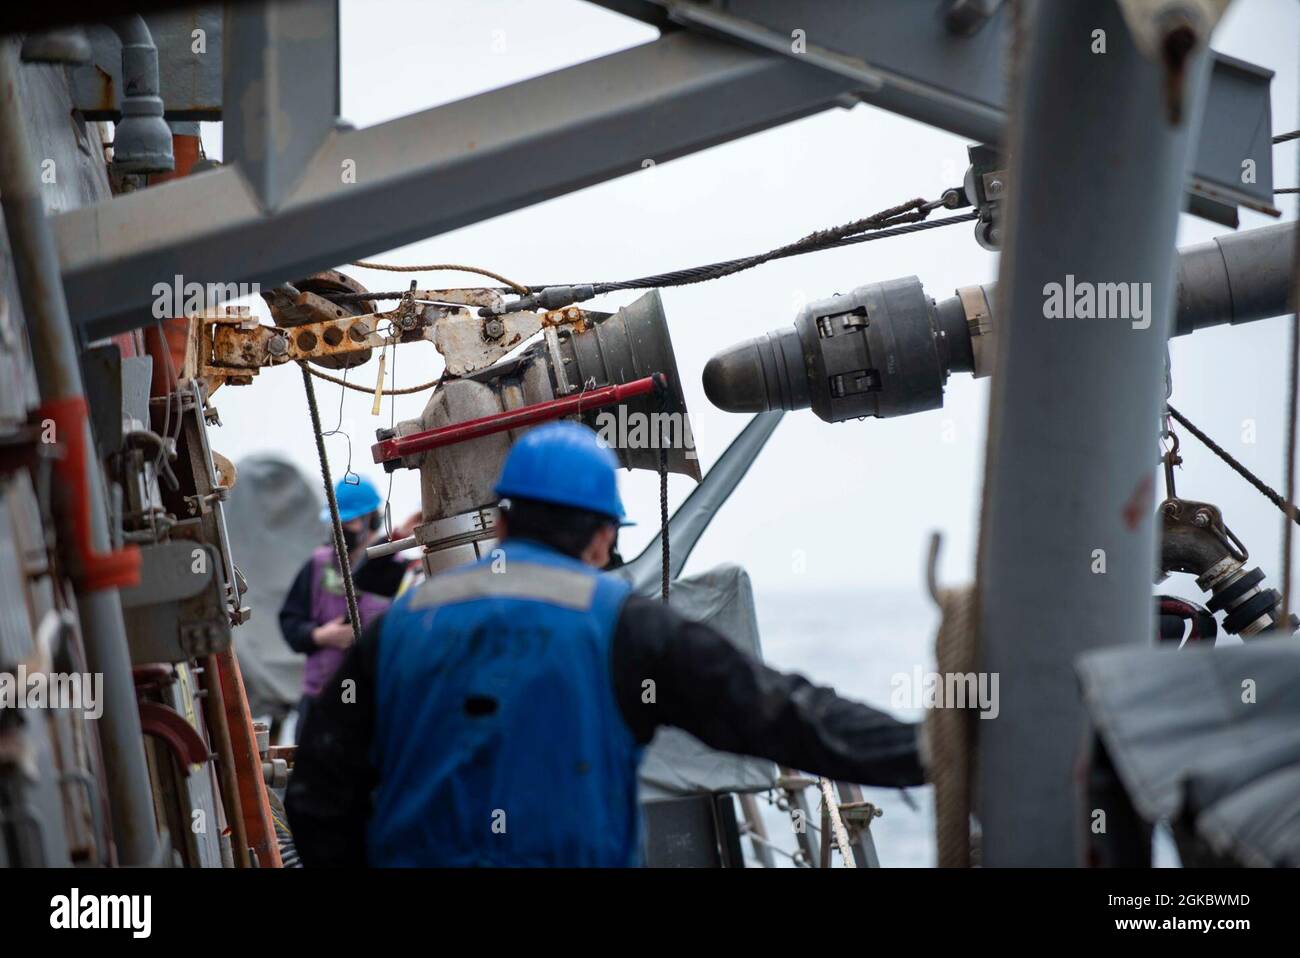 210307-N-QD512-1331 ATLANTIC OCEAN (March 7, 2021) A fuel probe is seated aboard the Arleigh Burke-class guided-missile destroyer USS Mitscher (DDG 57) during a replenishment-at-sea with the Supply-class fast combat supply support ship USNS Arctic (T-AOE 8), March 7, 2021. Mitscher is operating with the Ike Carrier Strike Group on a routine deployment in the U.S. Sixth Fleet area of operations in support of U.S. national interests and security in Europe and Africa. Stock Photo